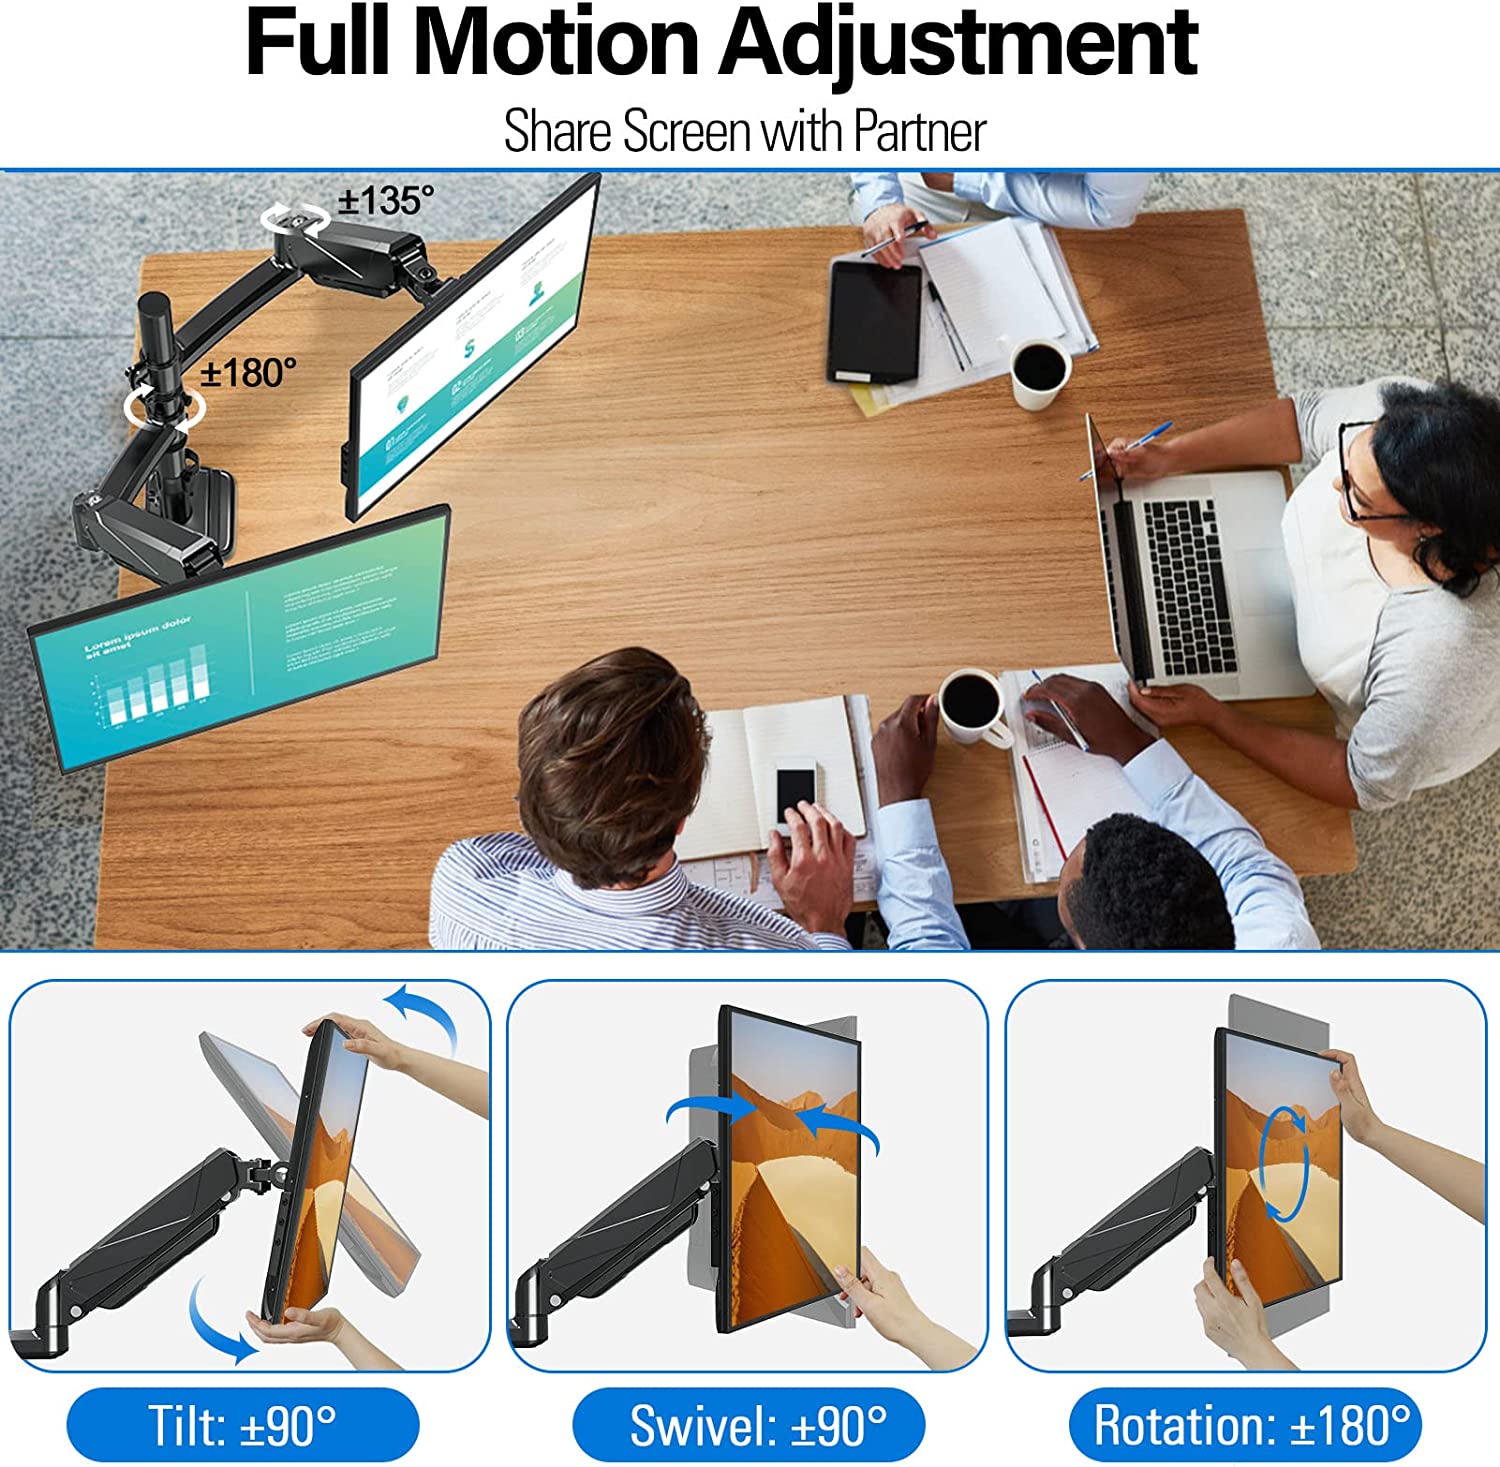 MOUNTUP Dual Monitor Stand, Height Adjustable Monitor Desk Mount, Support 17-32 inch Screens, Loads to 19.8lbs per Arm(MU6004)